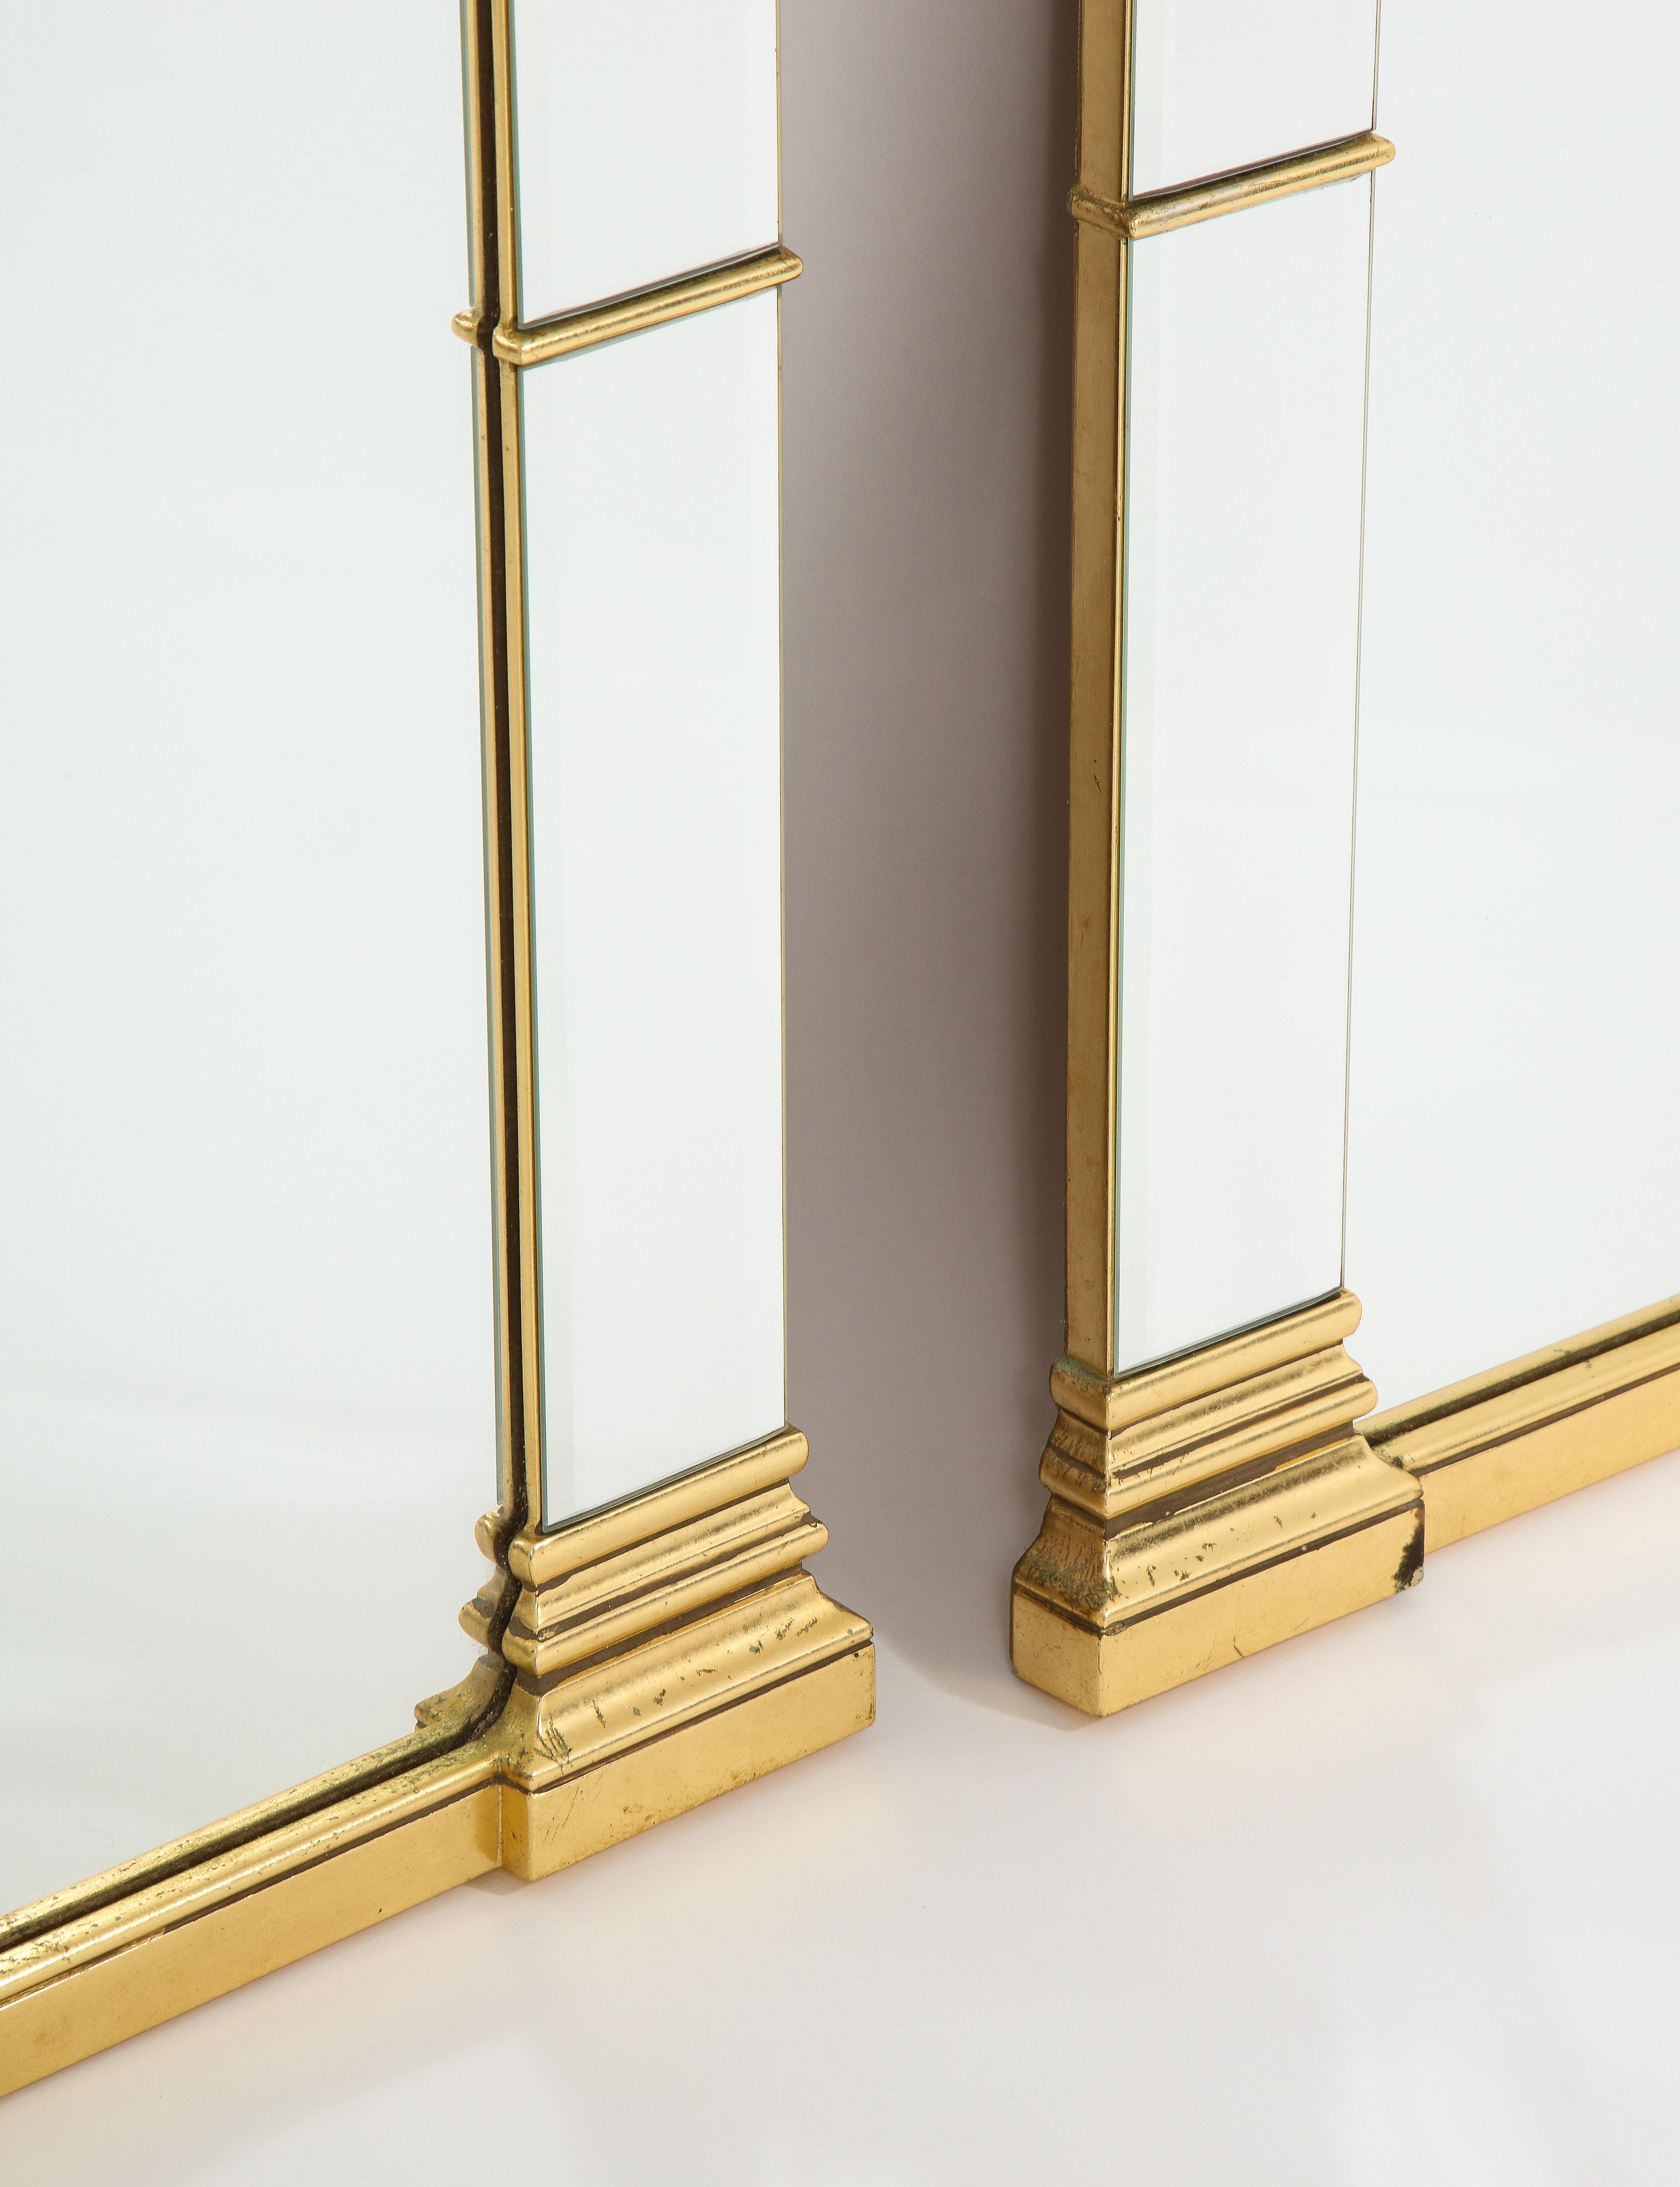 Pair of 20th Century French Neoclassical Mirrors with Gilt Accents For Sale 7